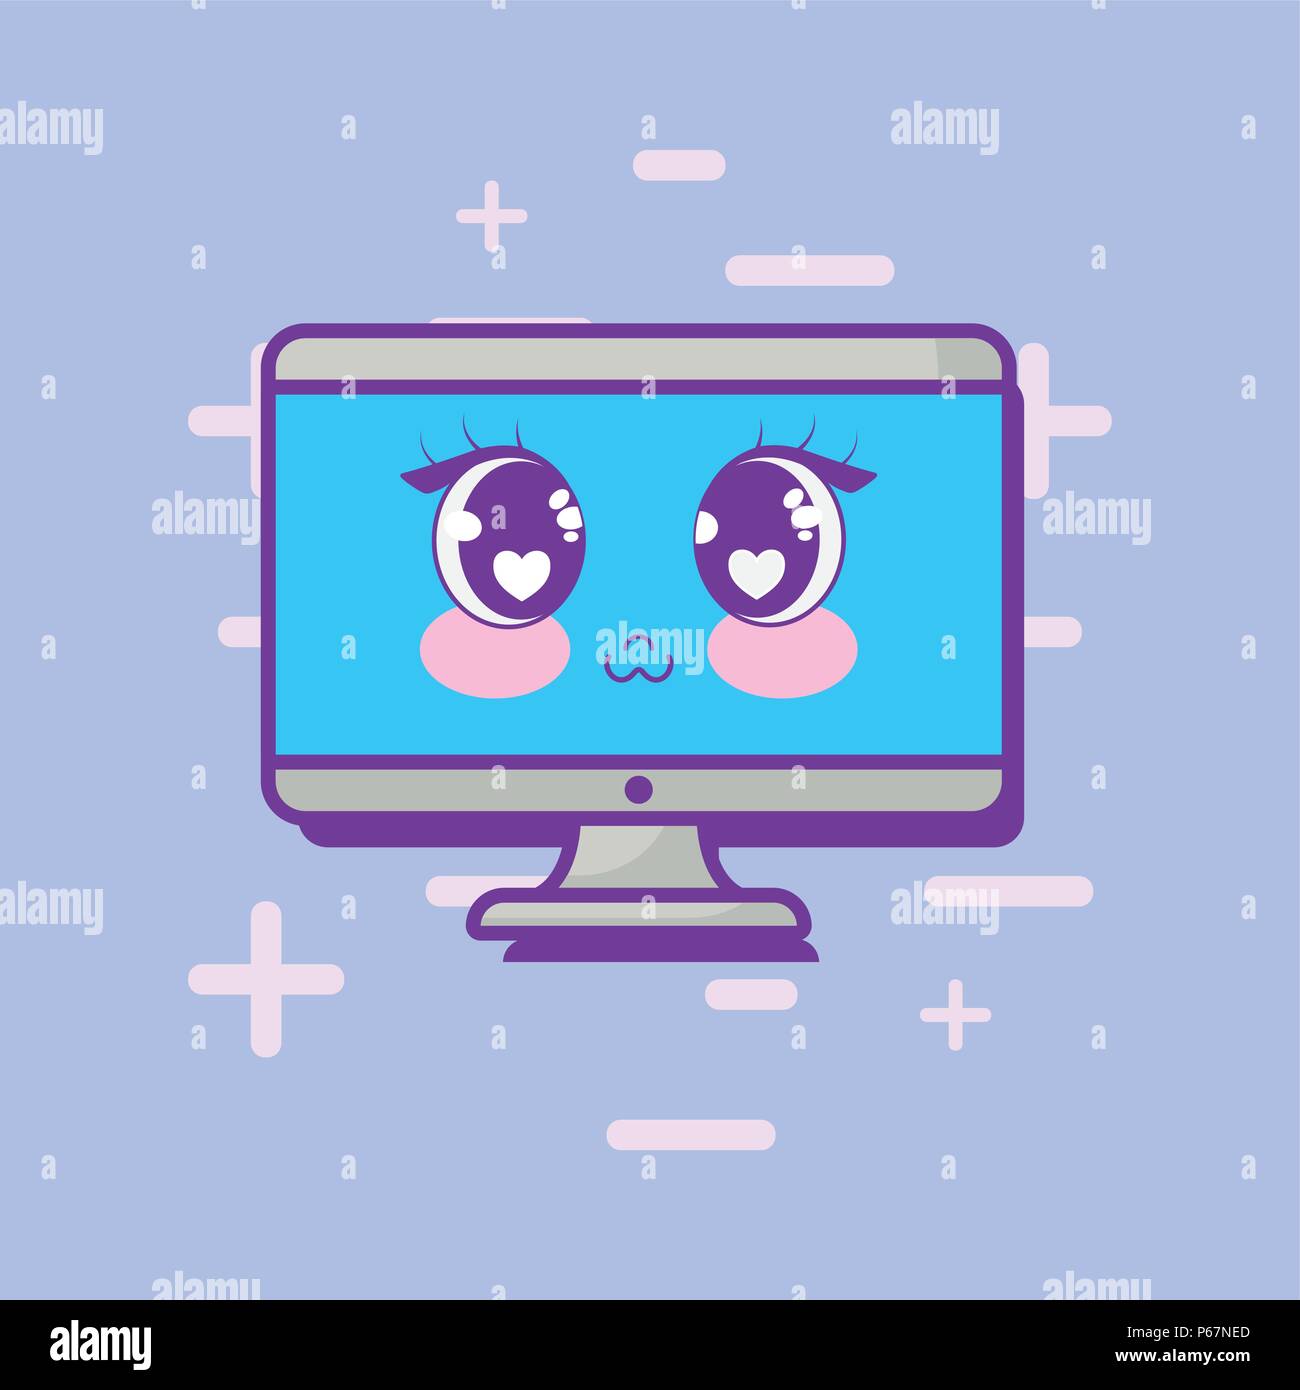 kawaii monitor computer icon over blue background, colorful design ...